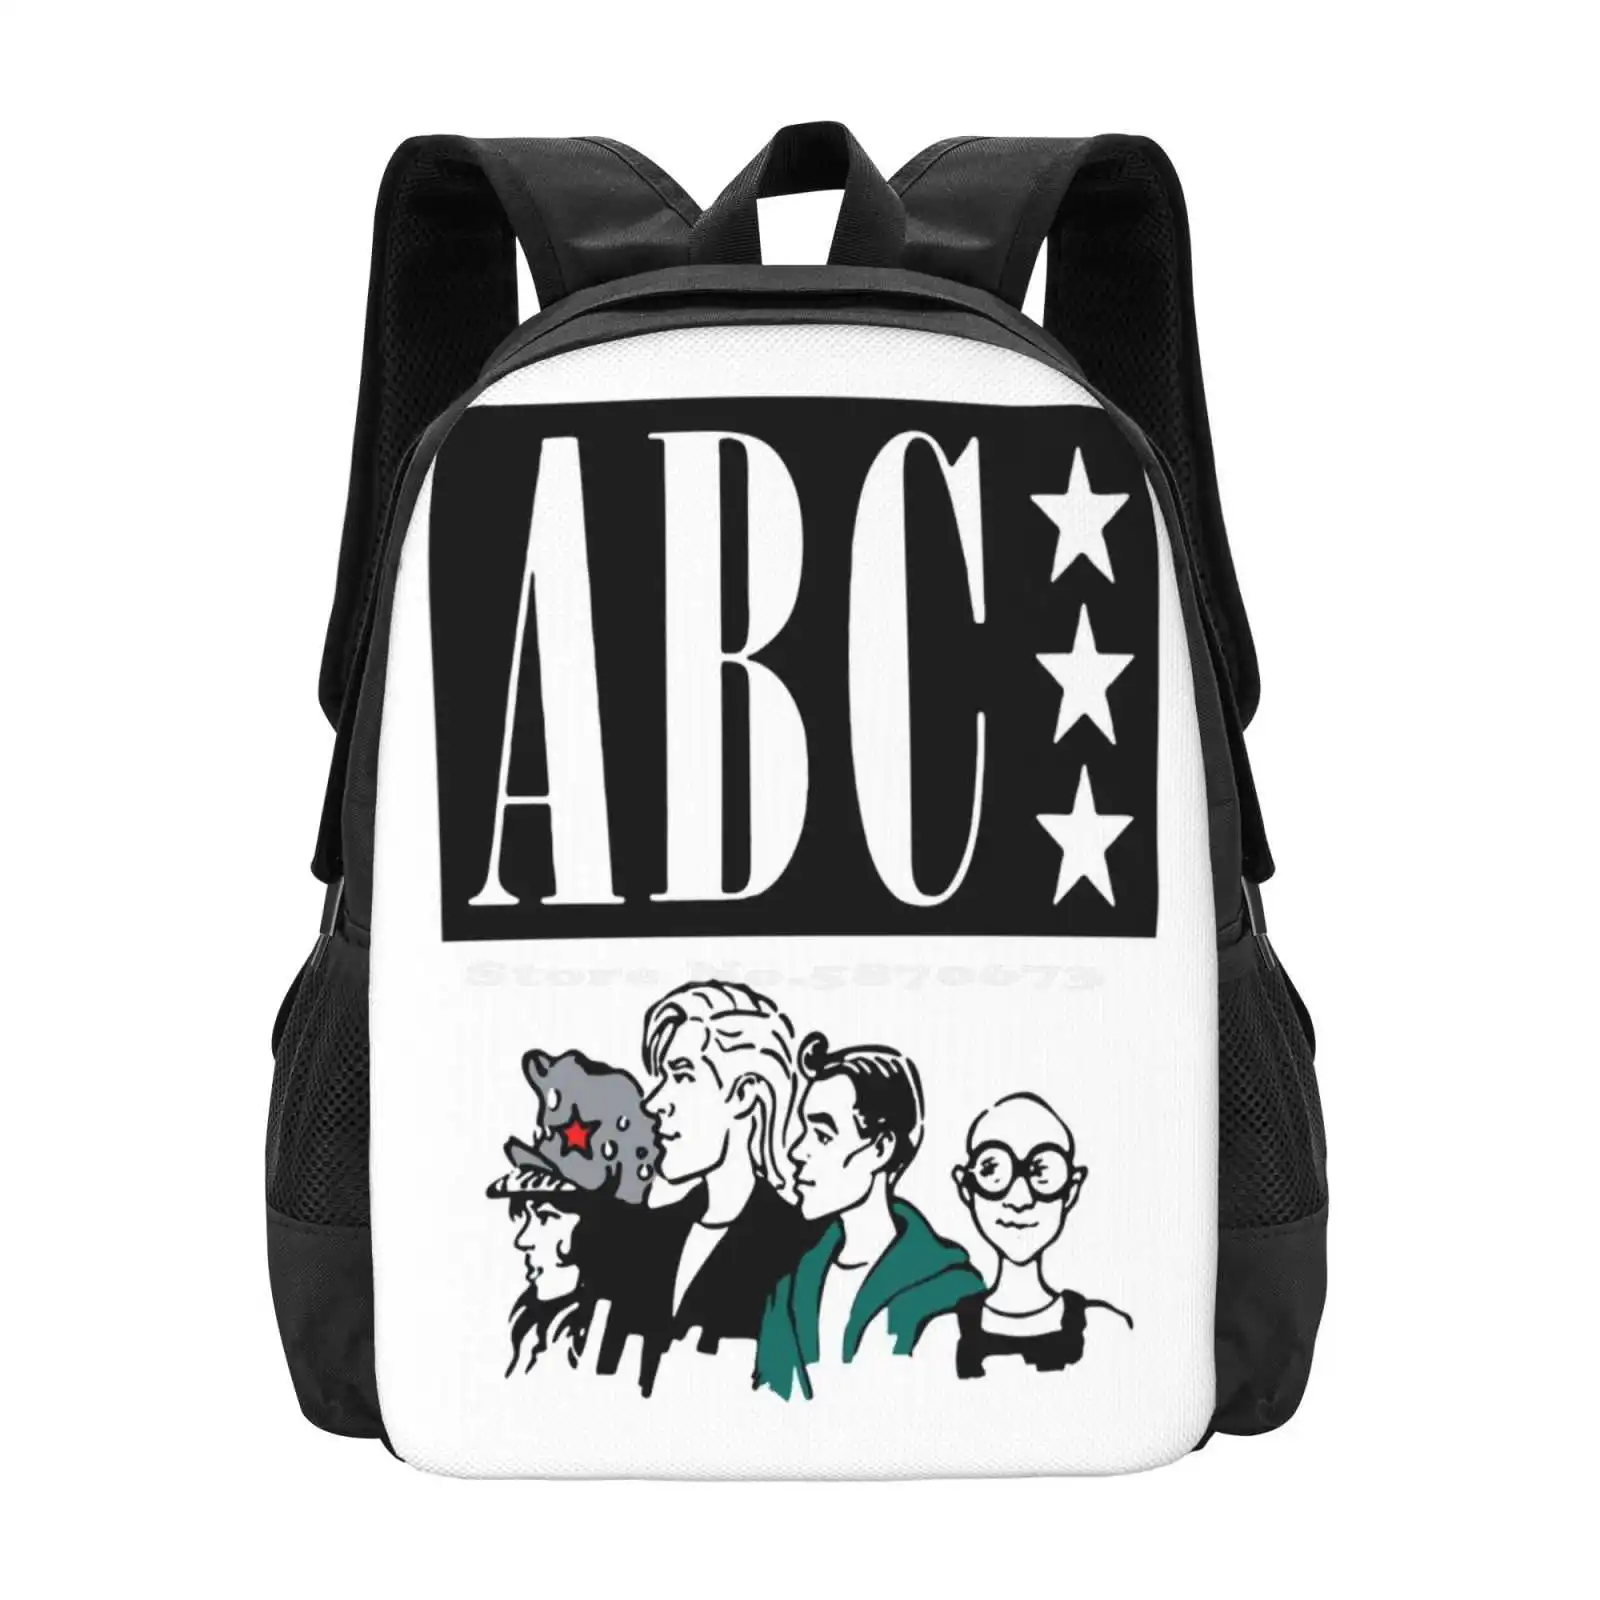 

English Pop Band Formed In Sheffield Hot Sale Backpack Fashion Bags Abc Band Lexicon 1980S Sheffield English